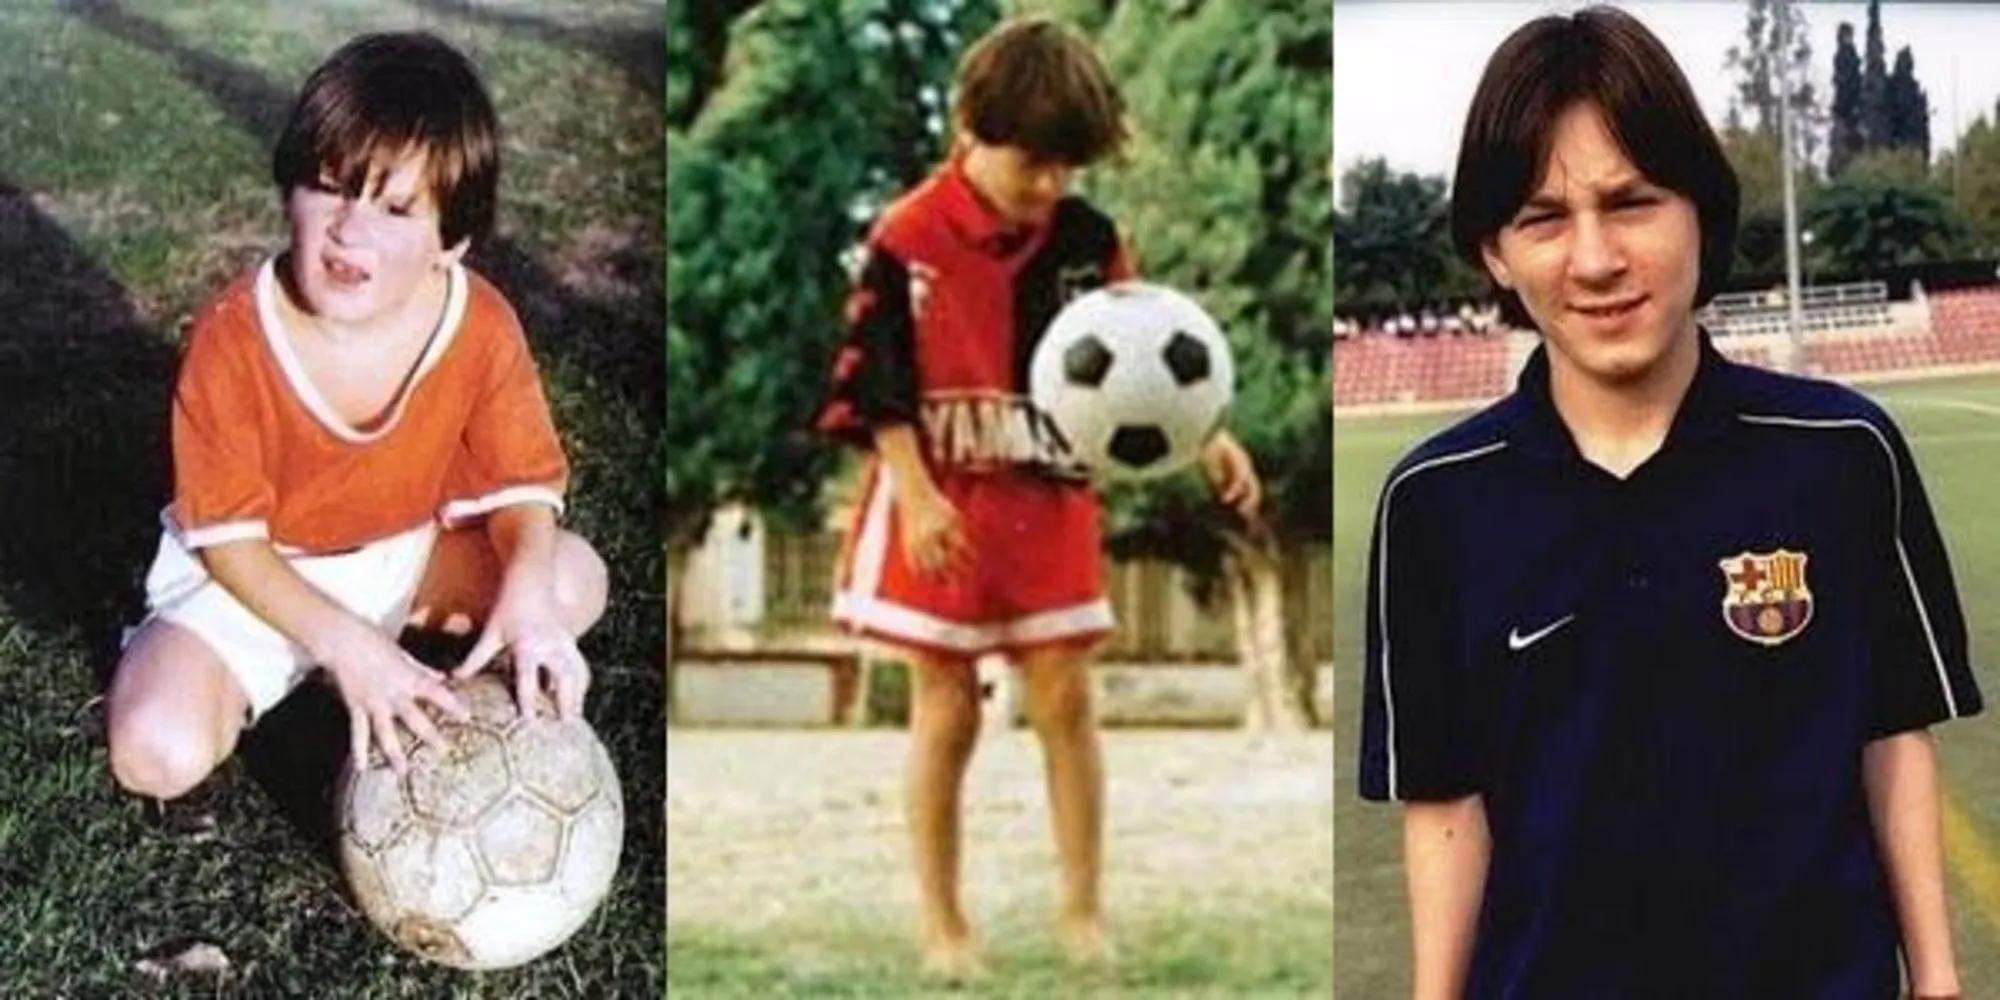 Growth Hormone Deficiency- A game of life won by Lionel Messi